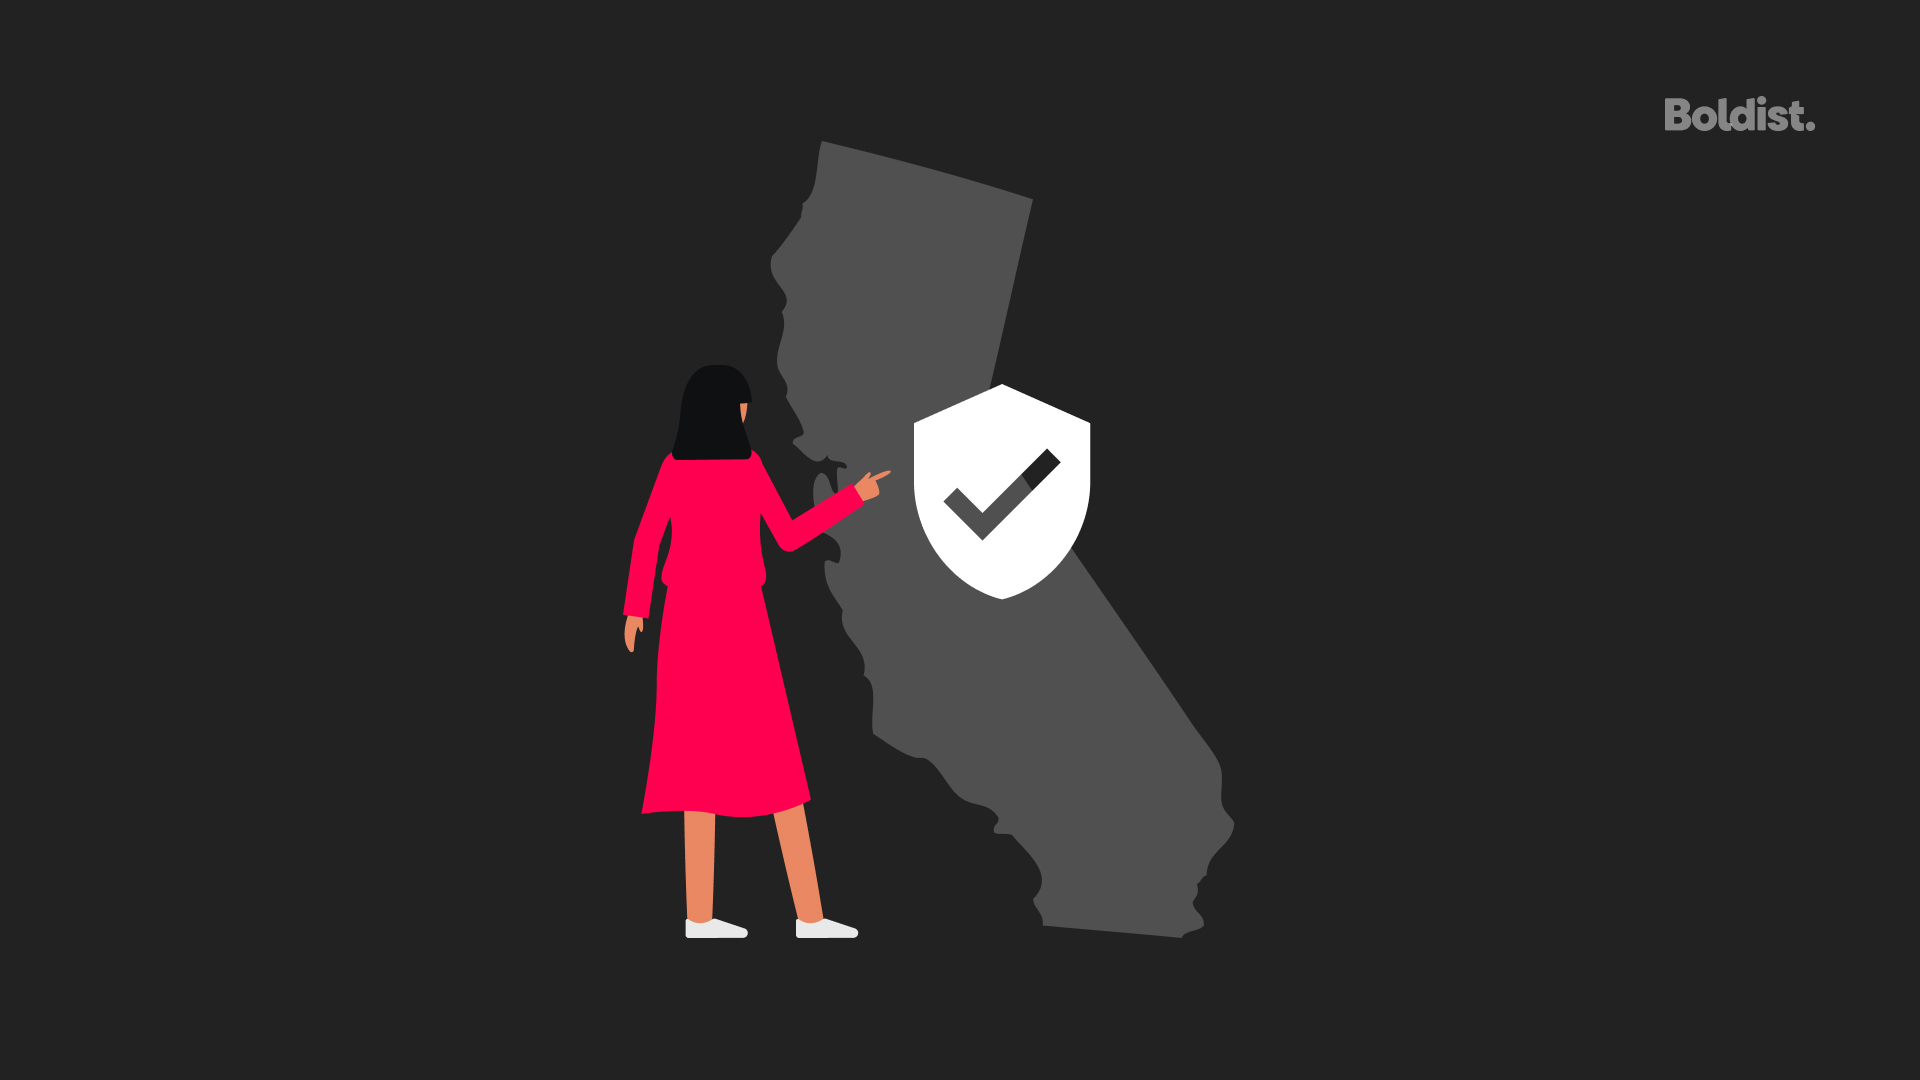 Boldist - The Guide to CCPA The California Consumer Privacy Act